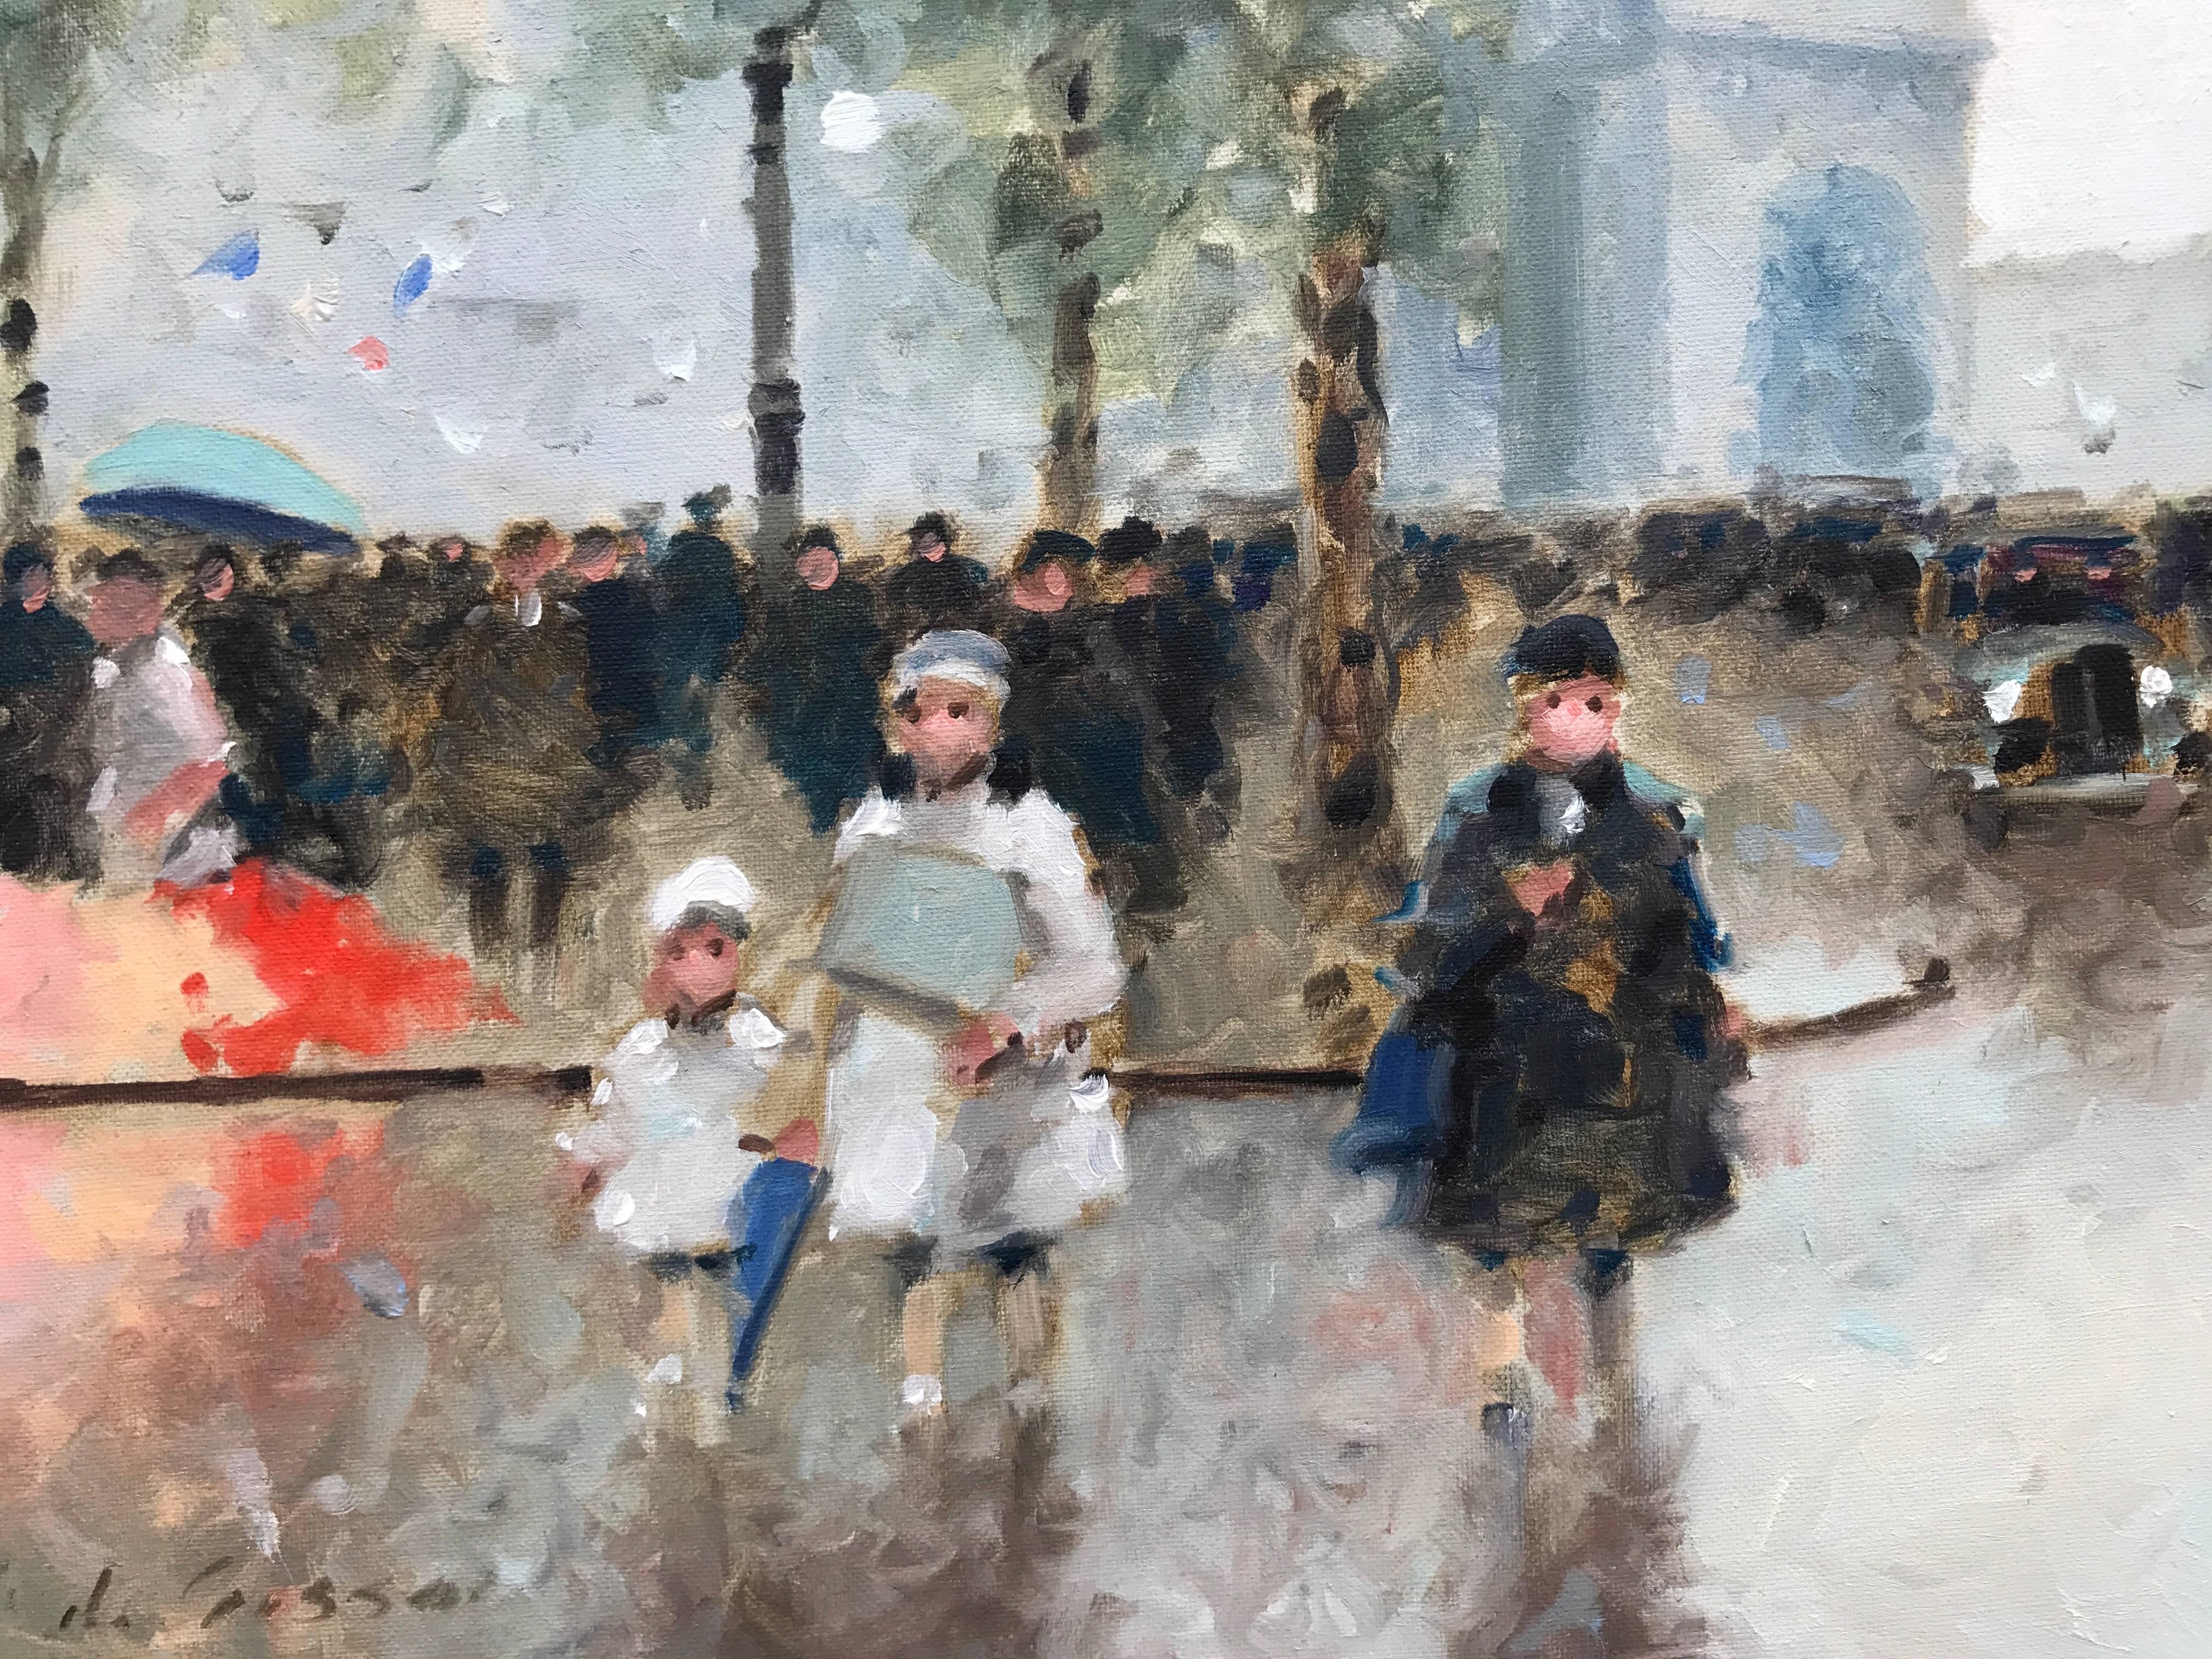 Original oil on canvas painting of people strolling near the Arc de Triomphe in Paris.  Signed lower left. Circa 1965. Housed in its original carved wood and gilt frame with grey and off white wash. Overall 20 by 23 inches.

André Gisson, American